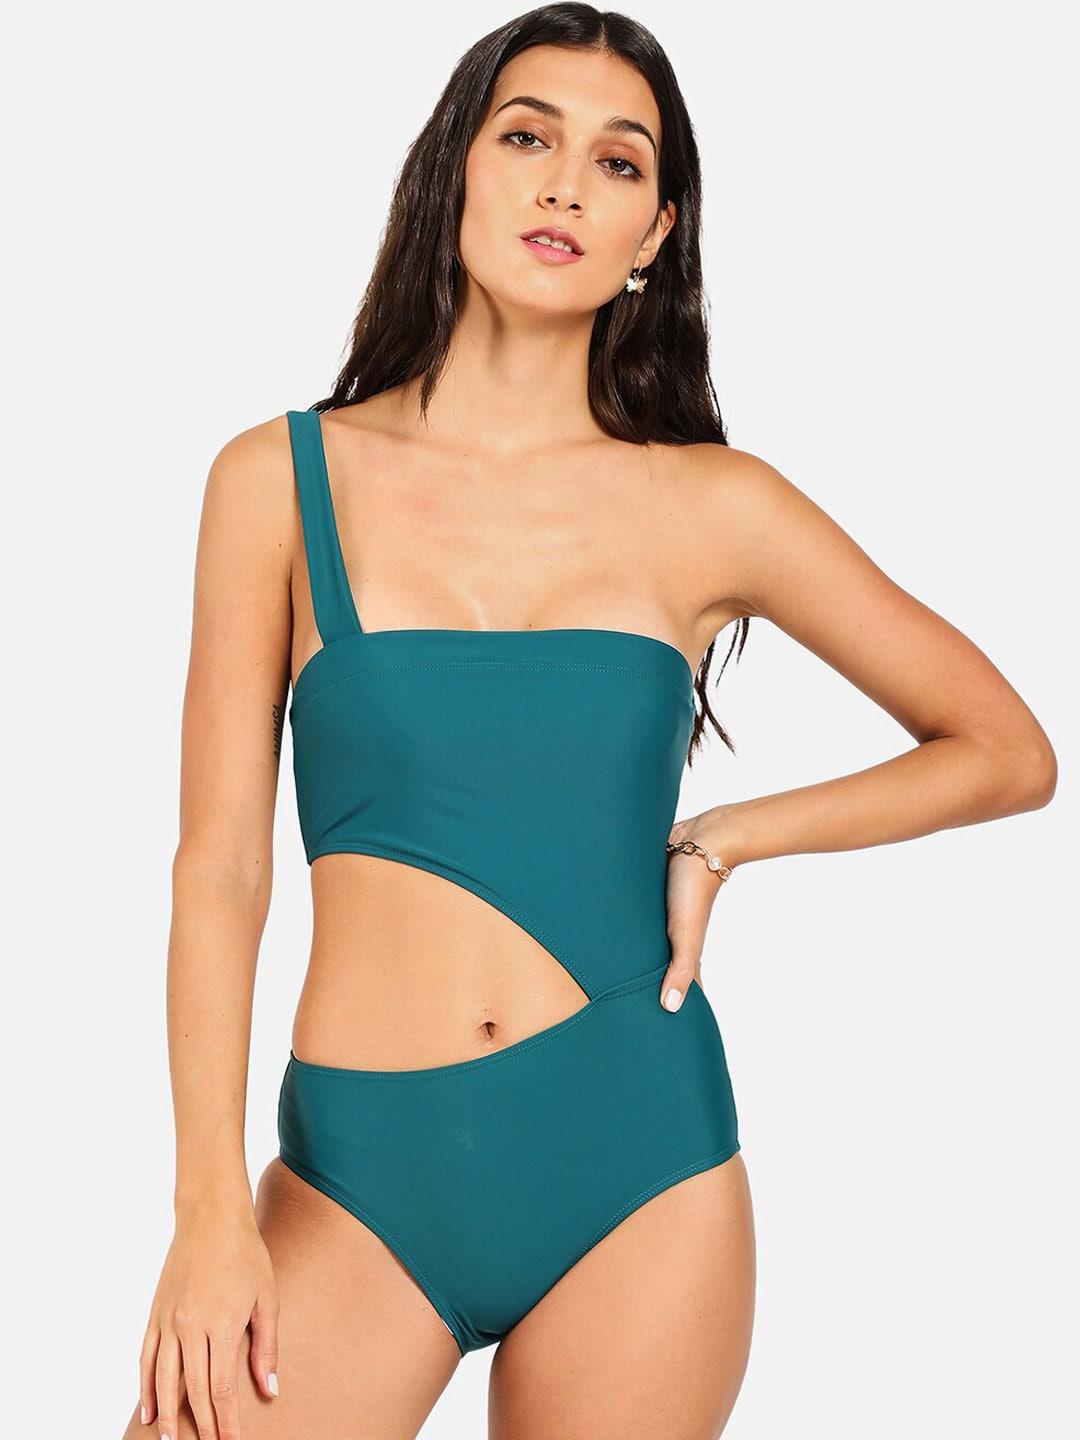 haute sauce by  campus sutra women cut-out one-piece swimsuit